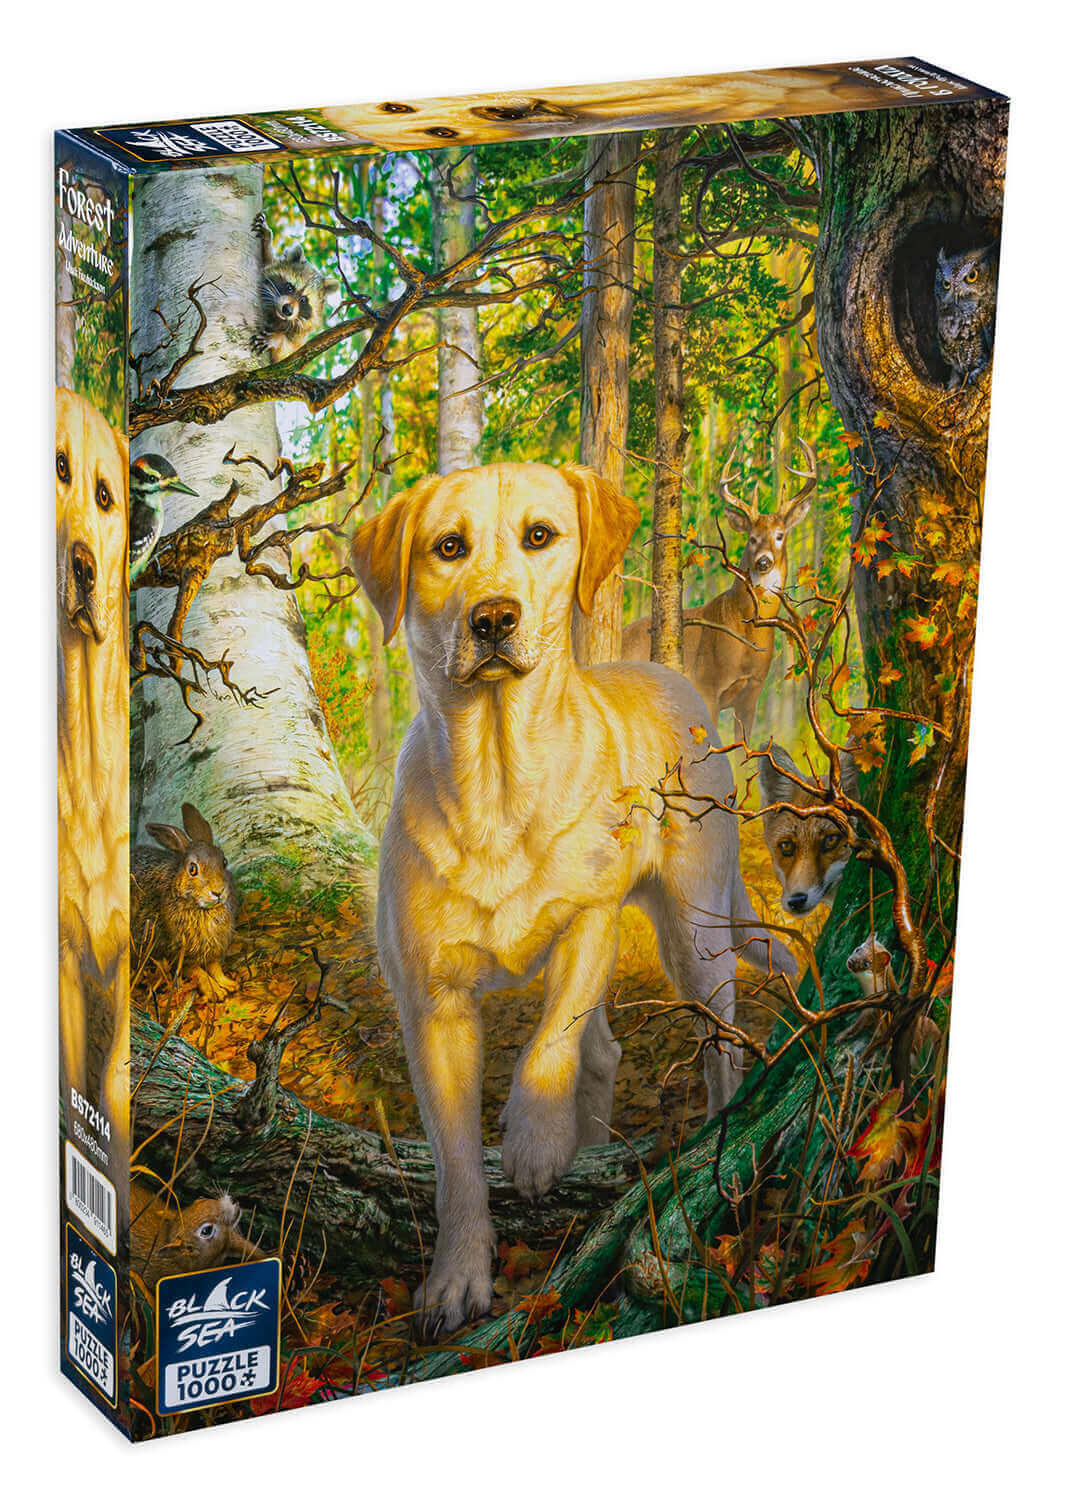 Puzzle Black Sea 1000 pieces - Forest adventure, Every day we choose a different trail across the woods so we add diversity to our route. But there is one trail we love; it is greener, beautiful, alive with forest wildlife. Me and my Labrador never miss t